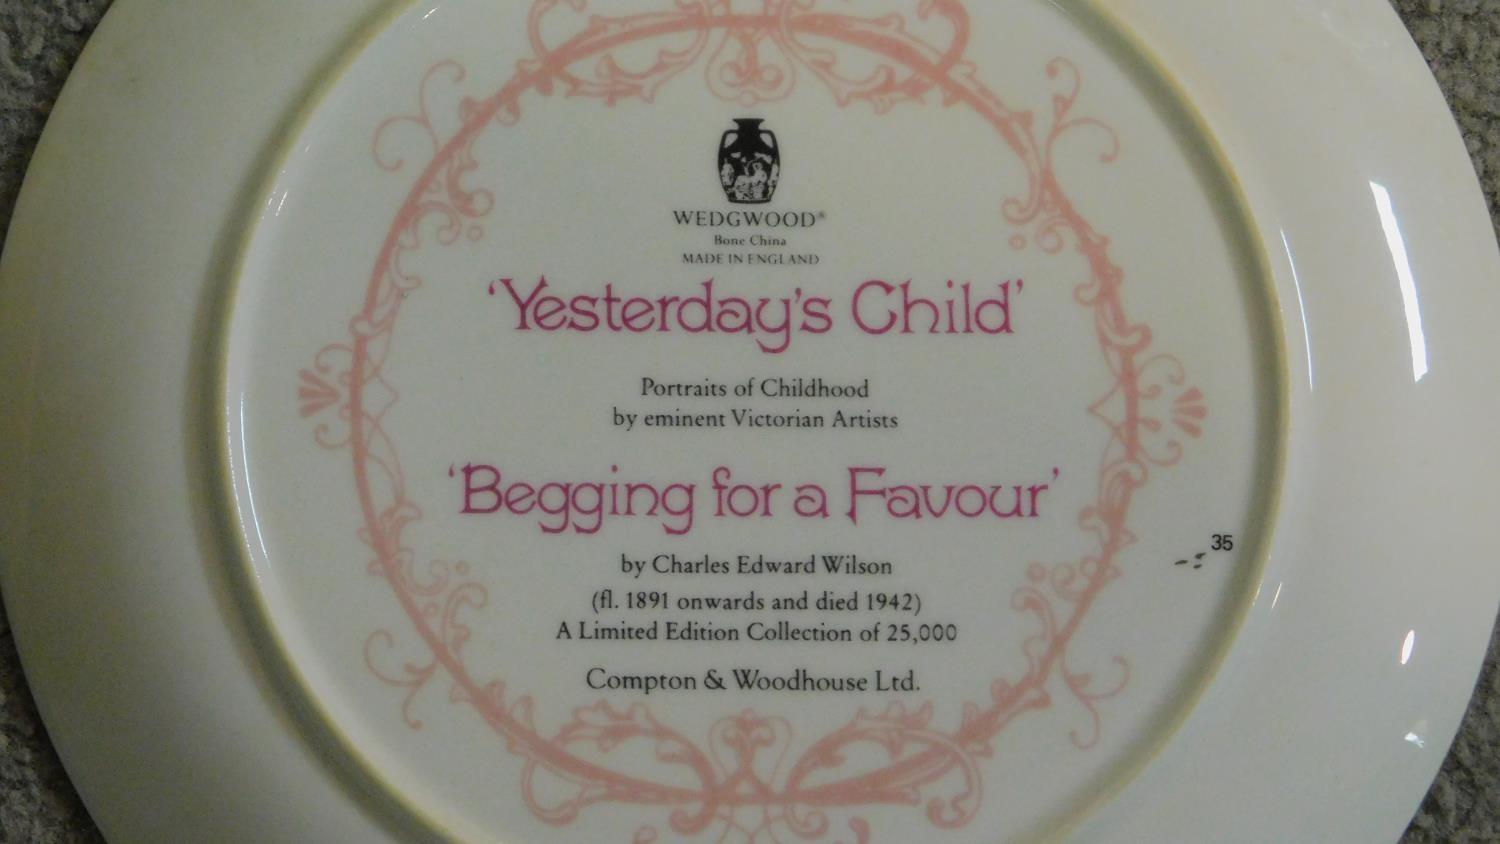 Three limited edition Wedgwood transfer wall plates by Charles Edward Wilson 'Yesterday's Child' - Image 5 of 5